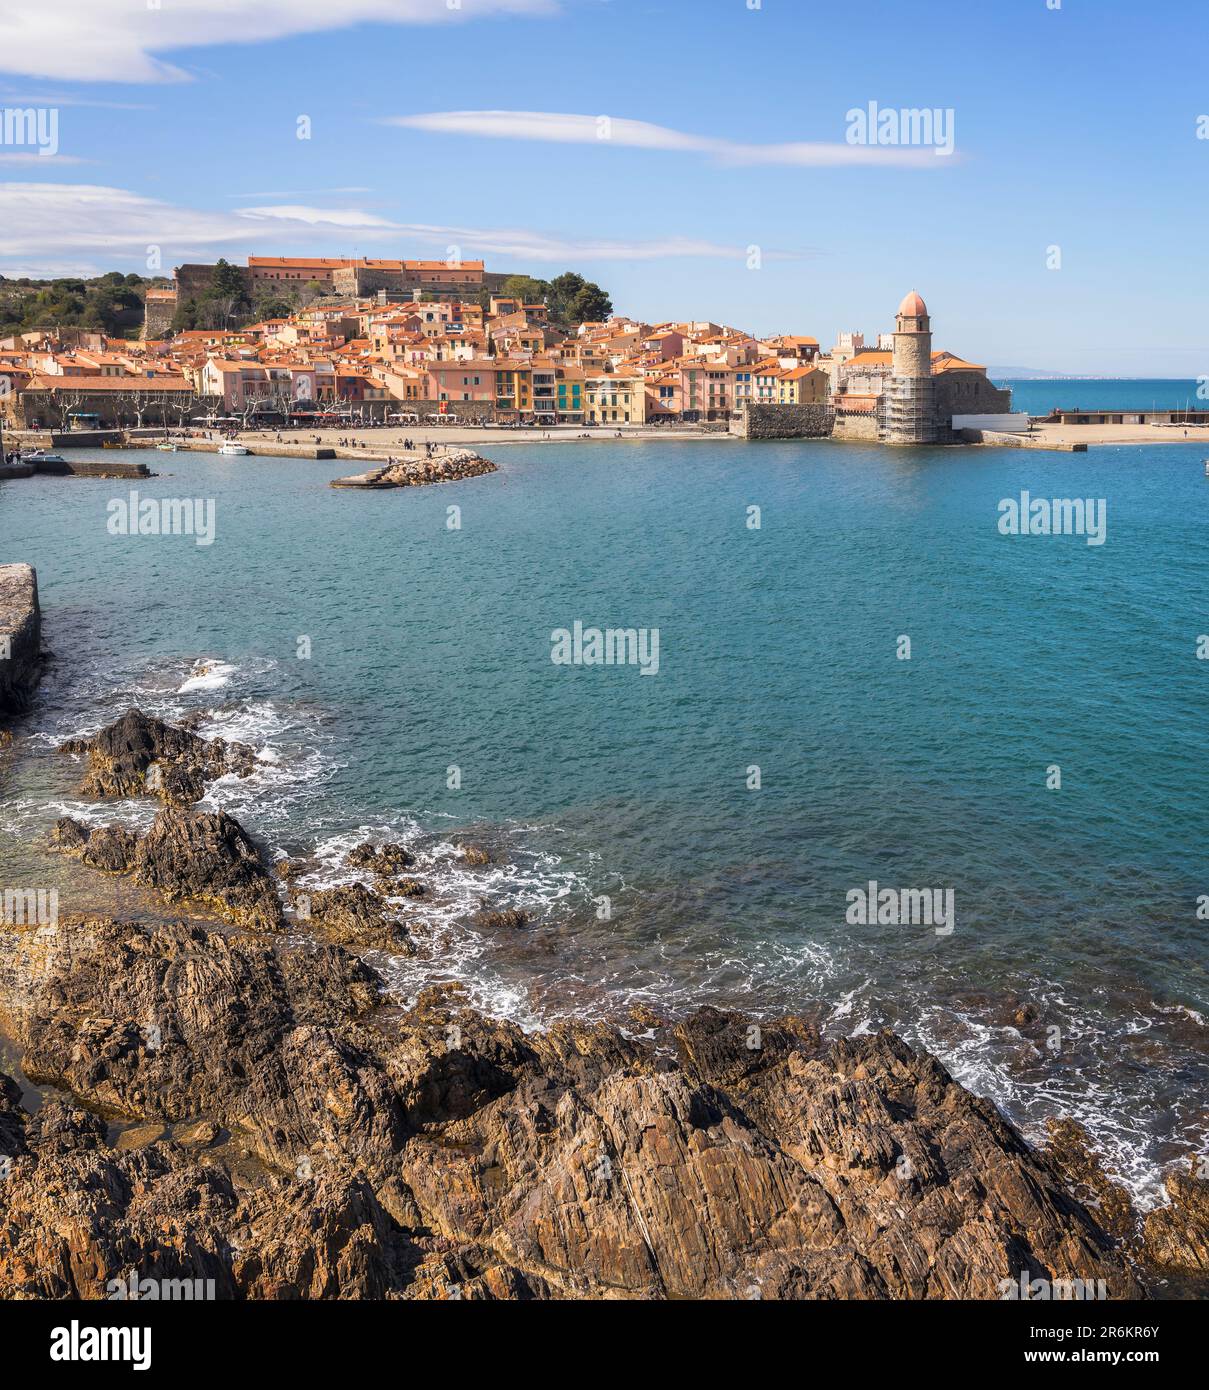 A picturesque view of the coastal city of Collioure, France Stock Photo